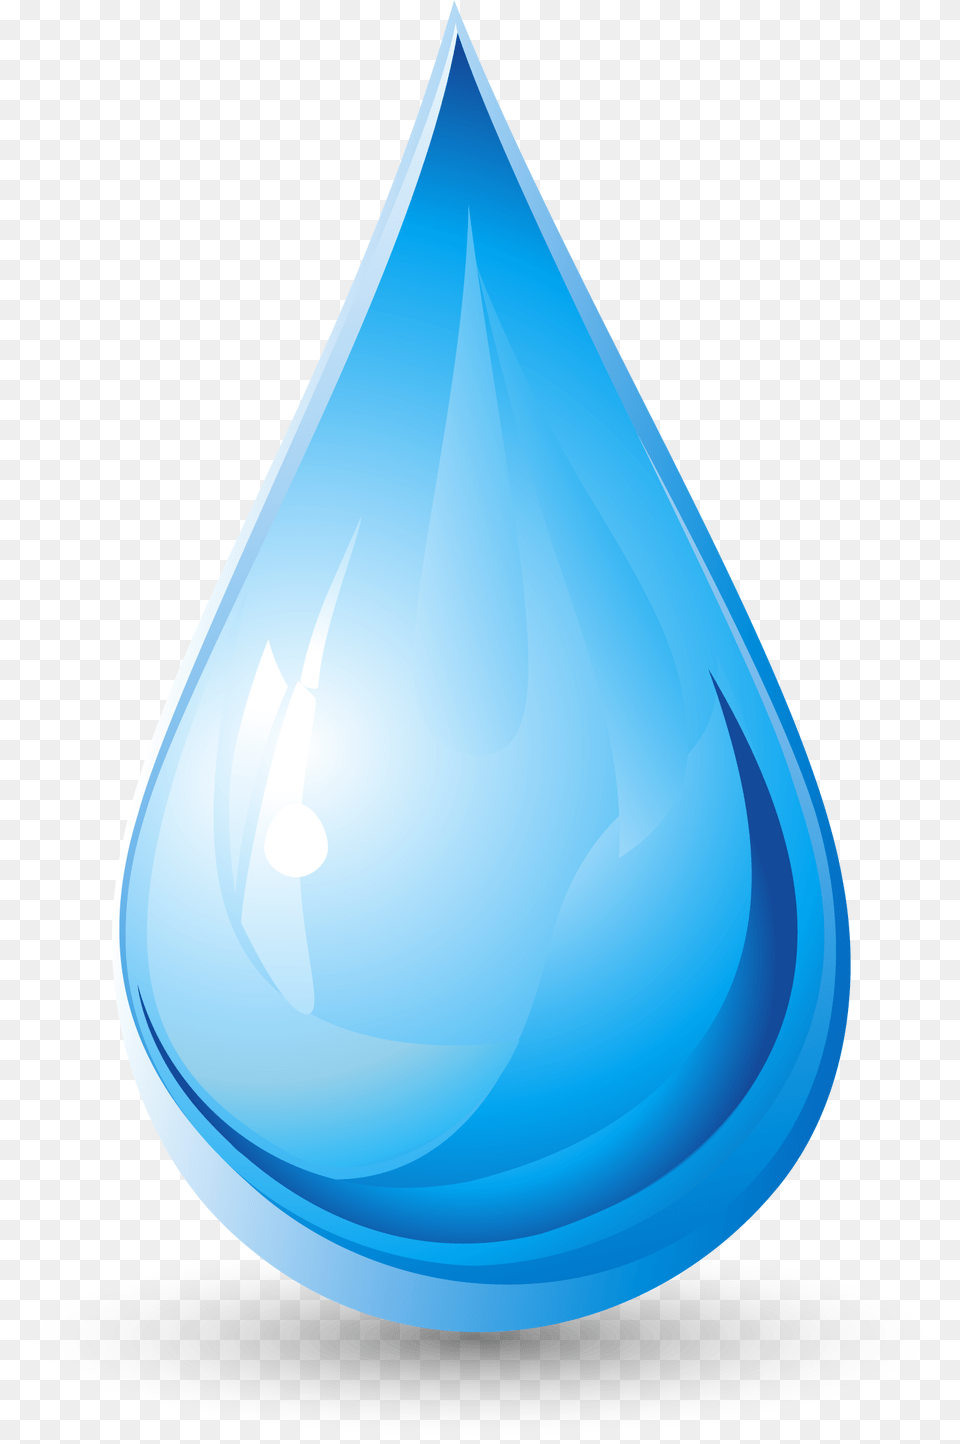 Water Droplets Drop Clipart Download Background Water Drop, Droplet, Jar, Astronomy, Moon Png Image